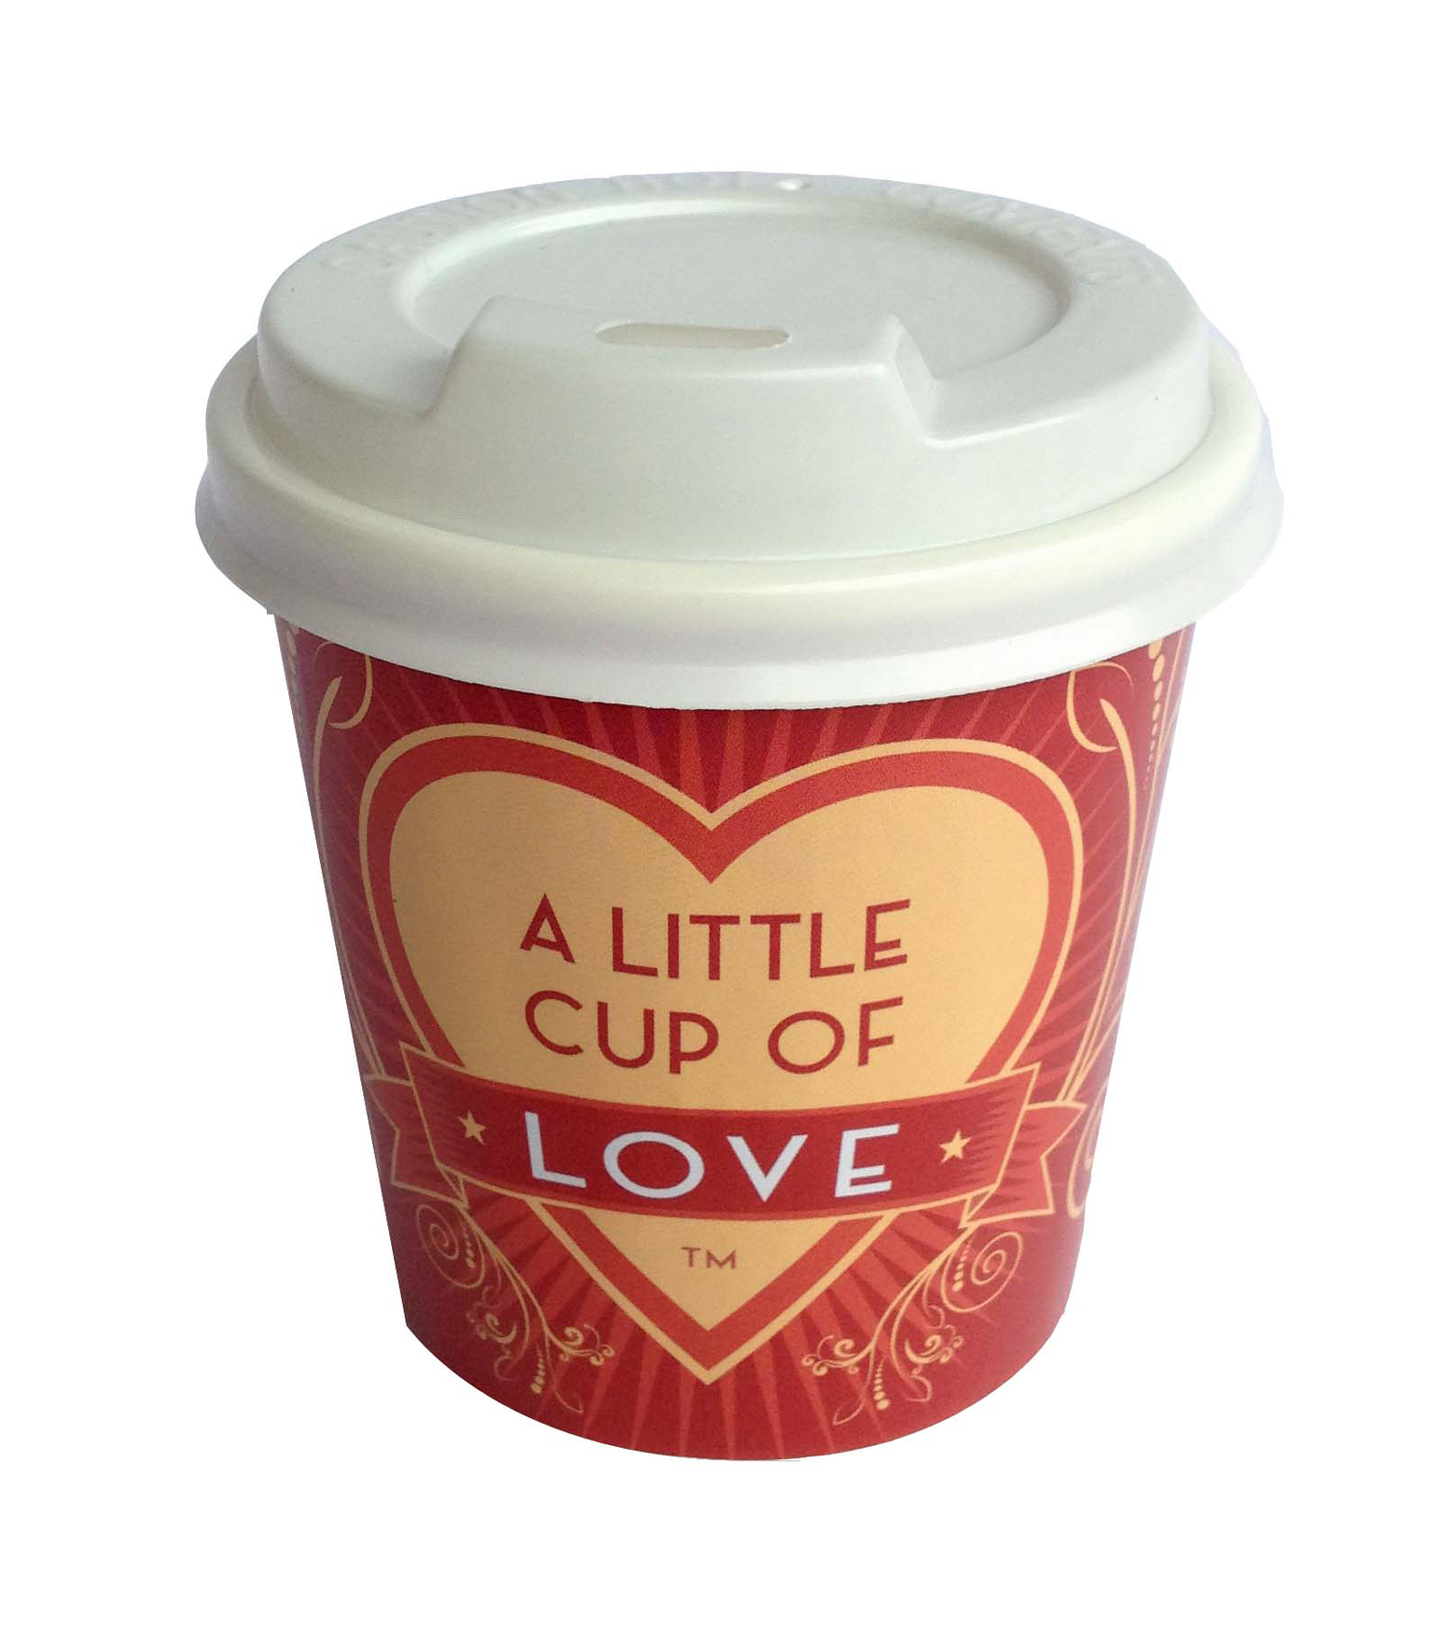 A little cup of love